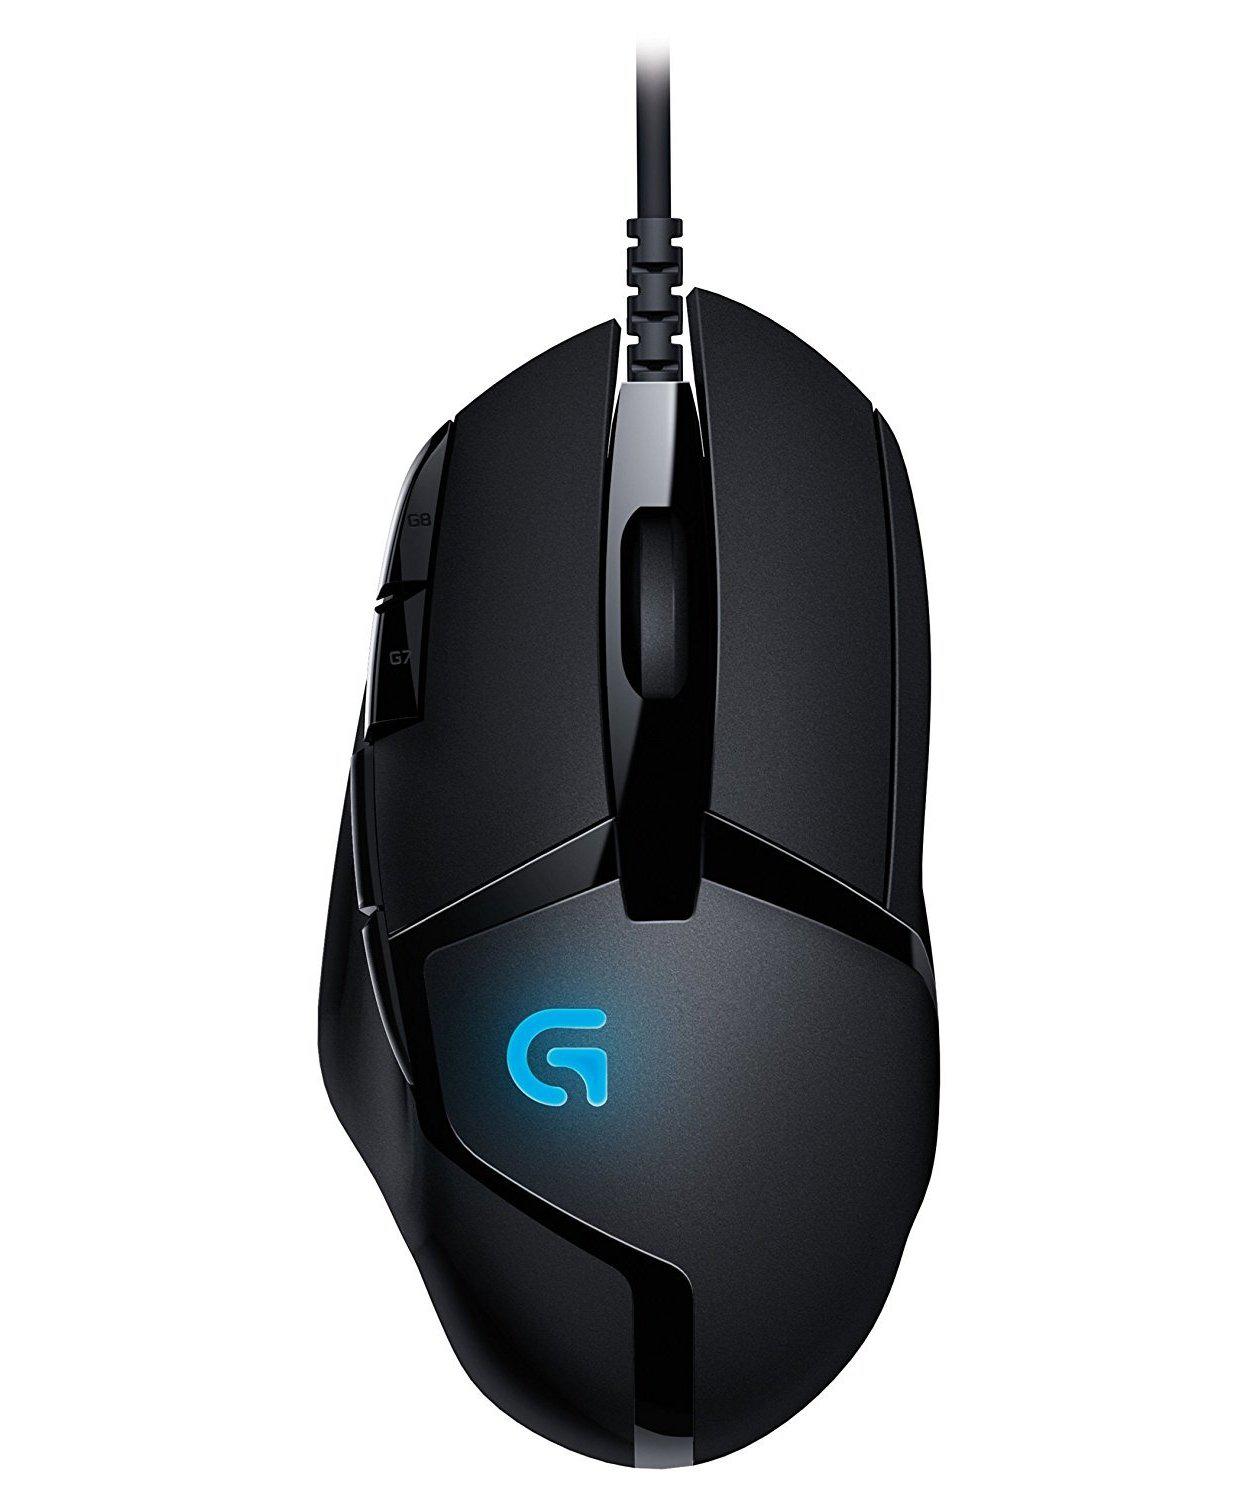 Logitech Mouse G402 Hyperion FPS Gaming Mouse with High Speed Fus Click.com.bn